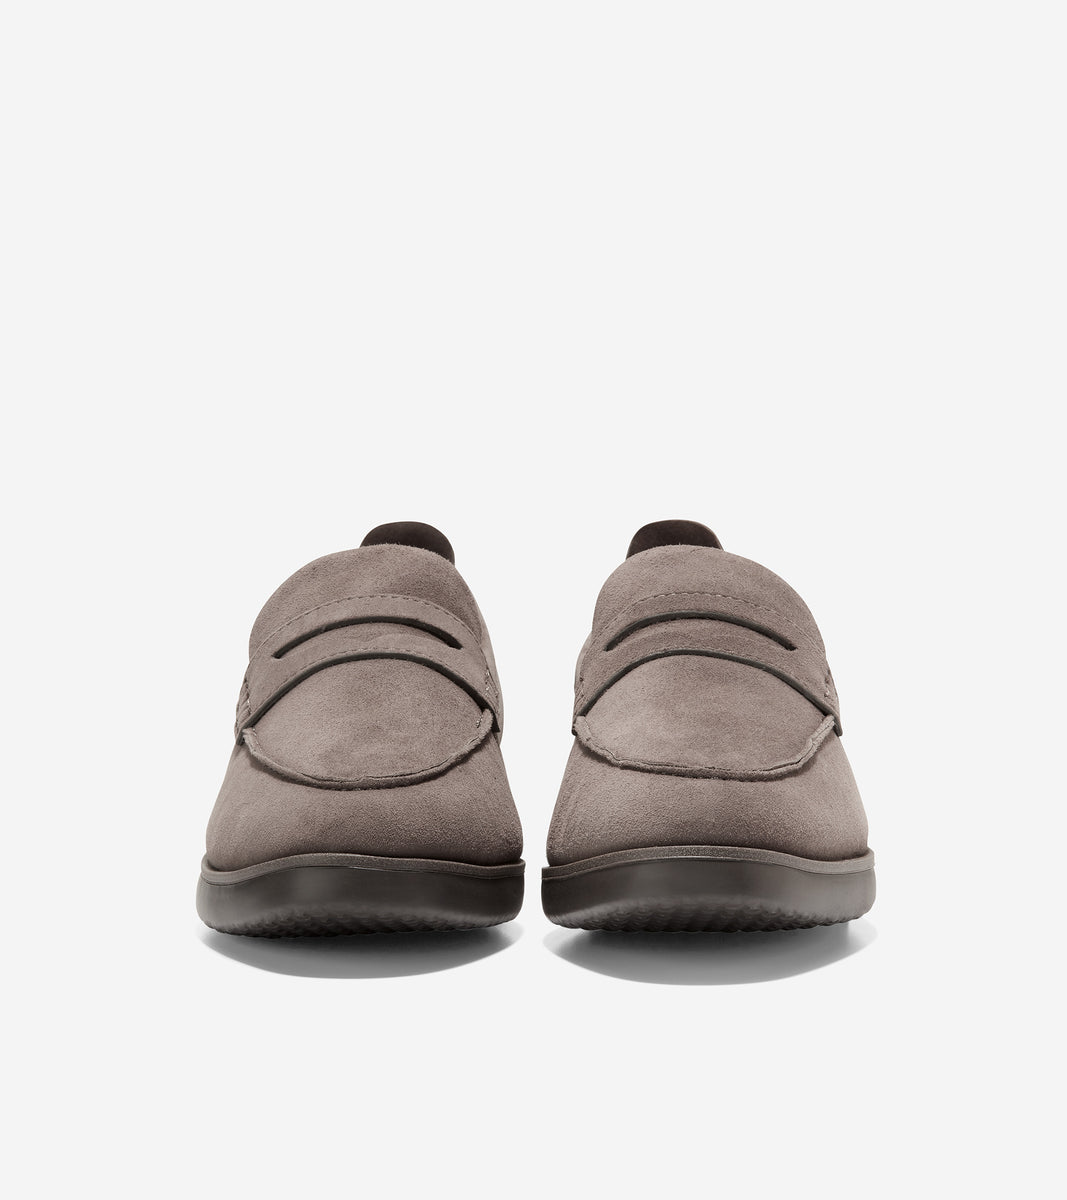 Grand Ambition Tolly Penny Loafer